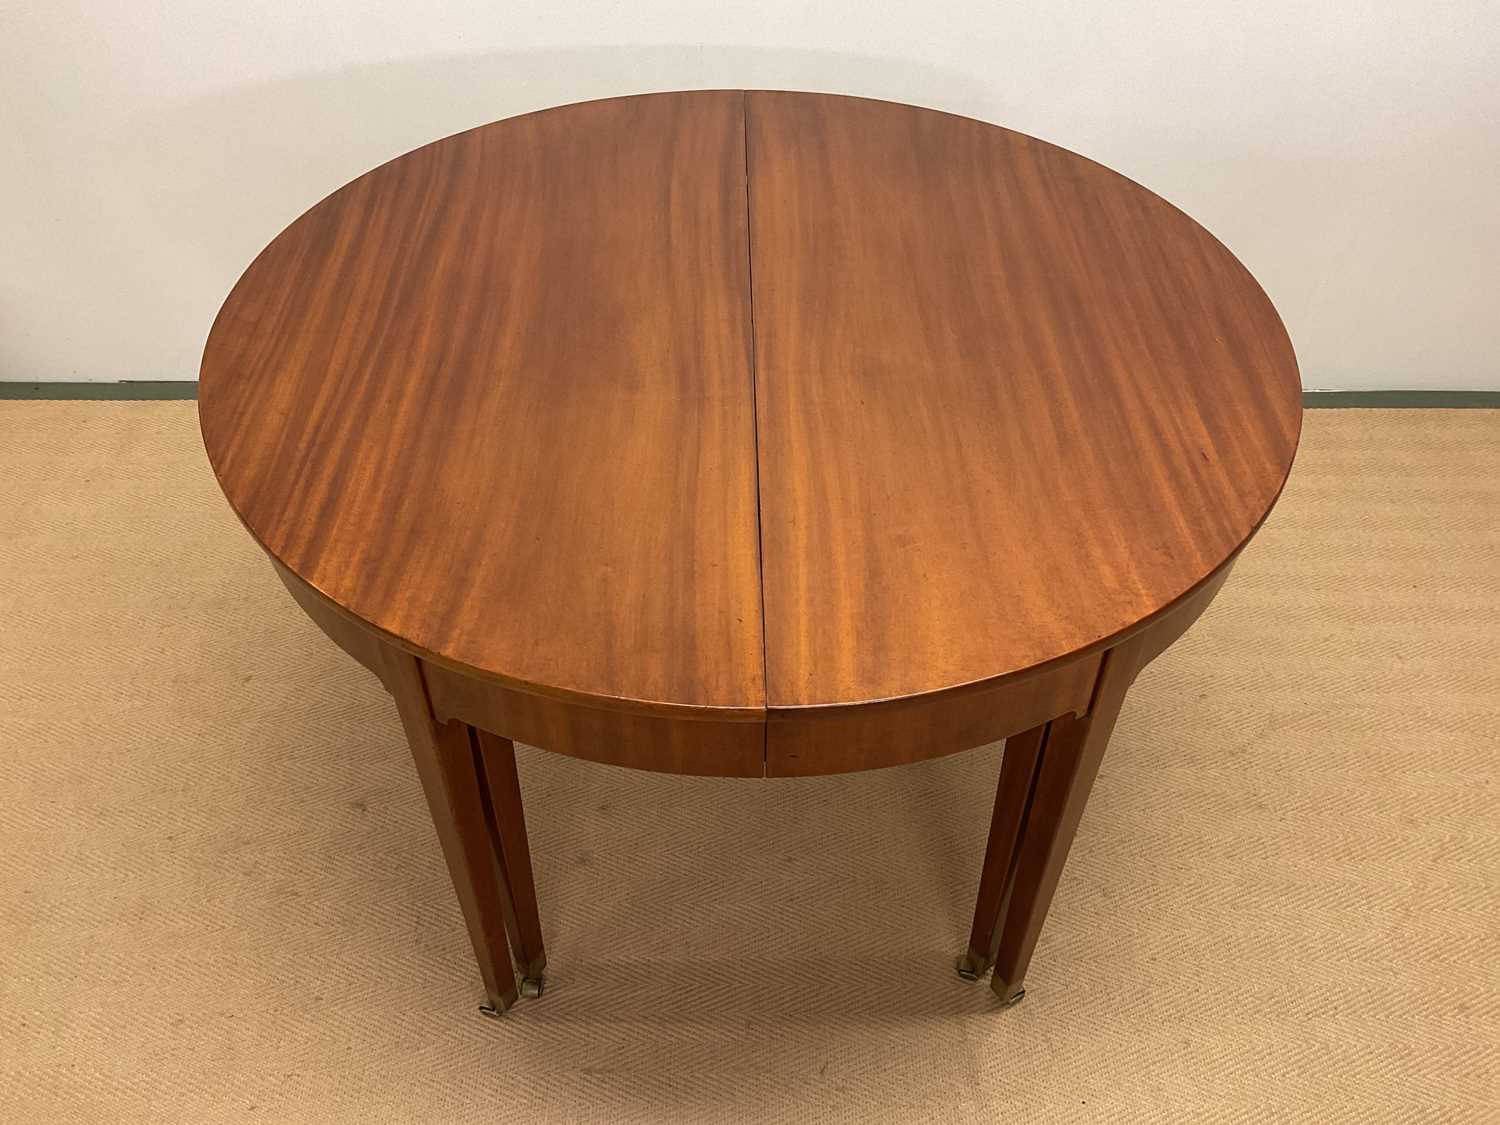 KAARE KLINT FOR RUD RASMUSSEN; a Danish early 20th century circular dining table, with paper label - Image 2 of 9